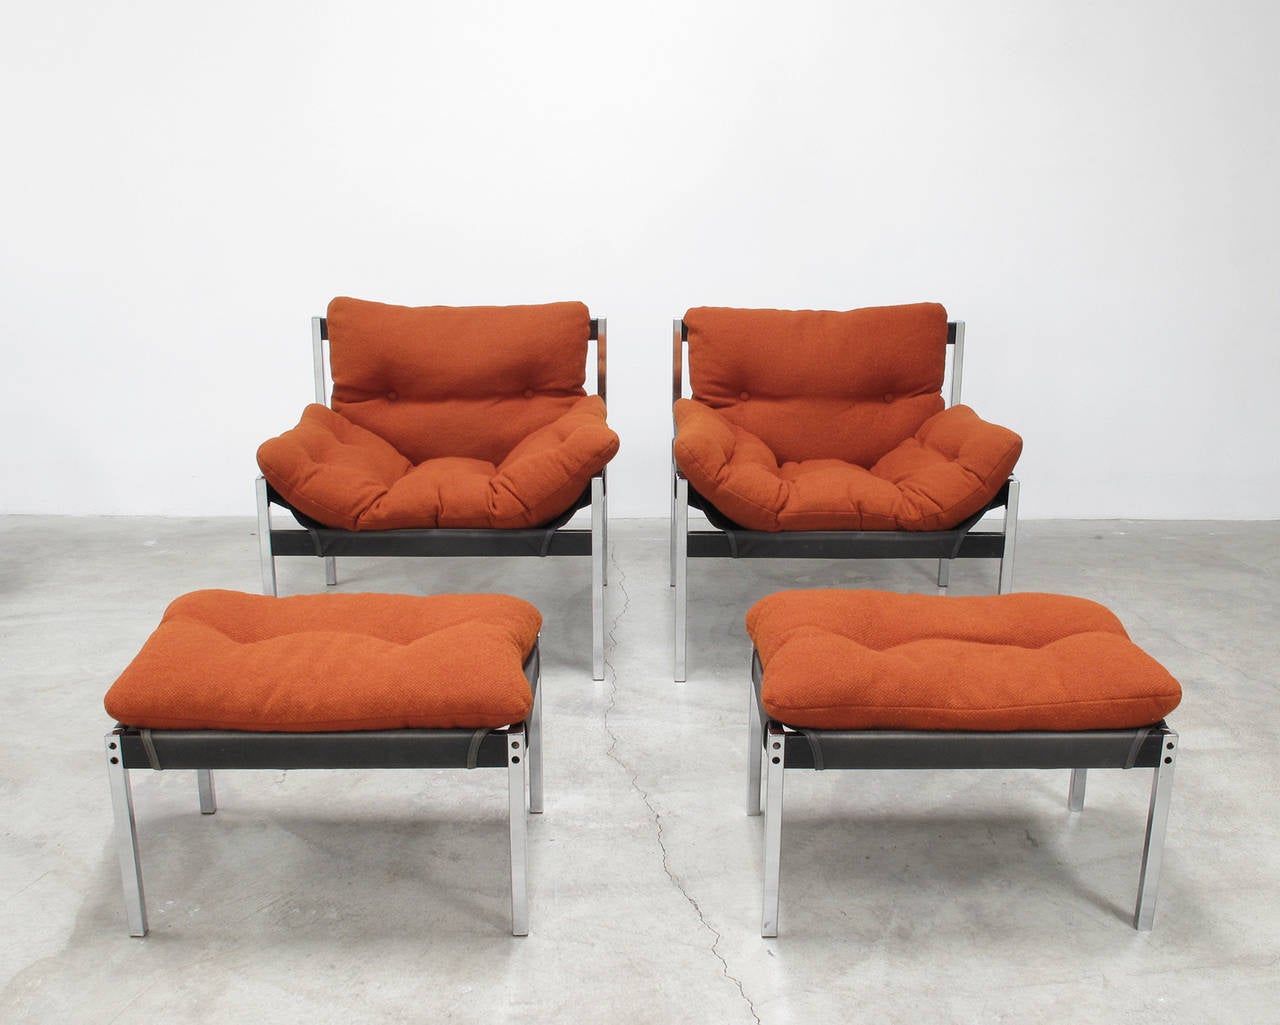 Pair of sling lounge chairs and accompanying ottomans in chrome plated tubular steel and black-stained mahogany frame punctuated by colorful and comfortably stuffed cushions, designed by Byron Betker and Jerry Johnson and made by Landes